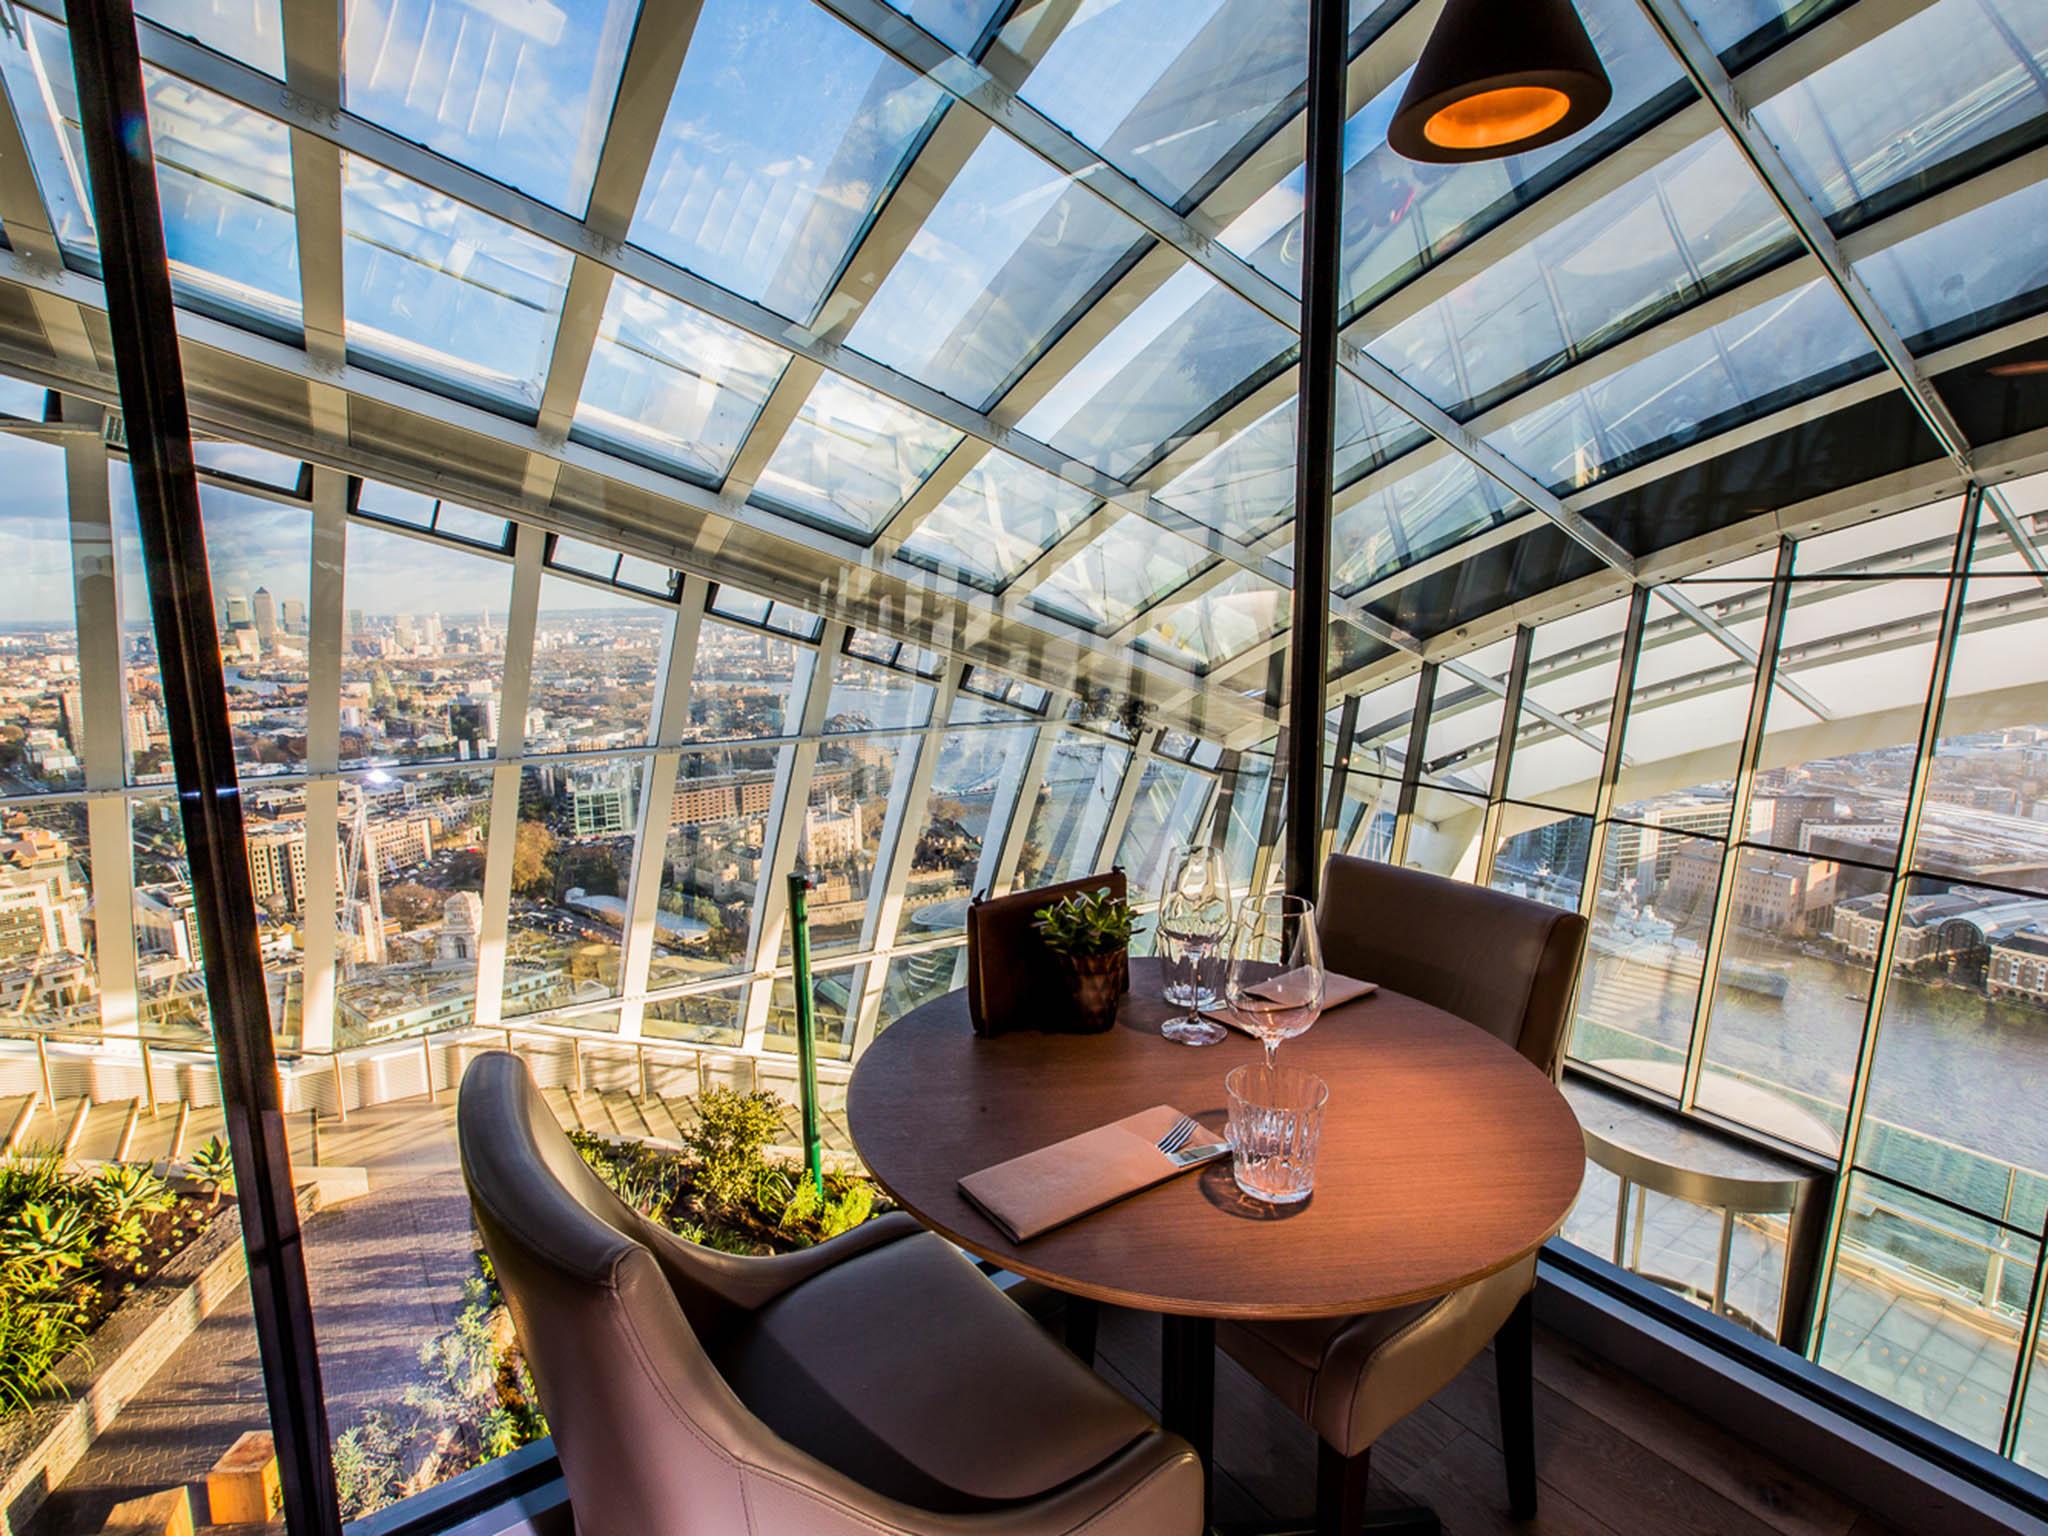 Head up to the 36th floor of the Walkie Talkie tower to find the Darwin Brasserie